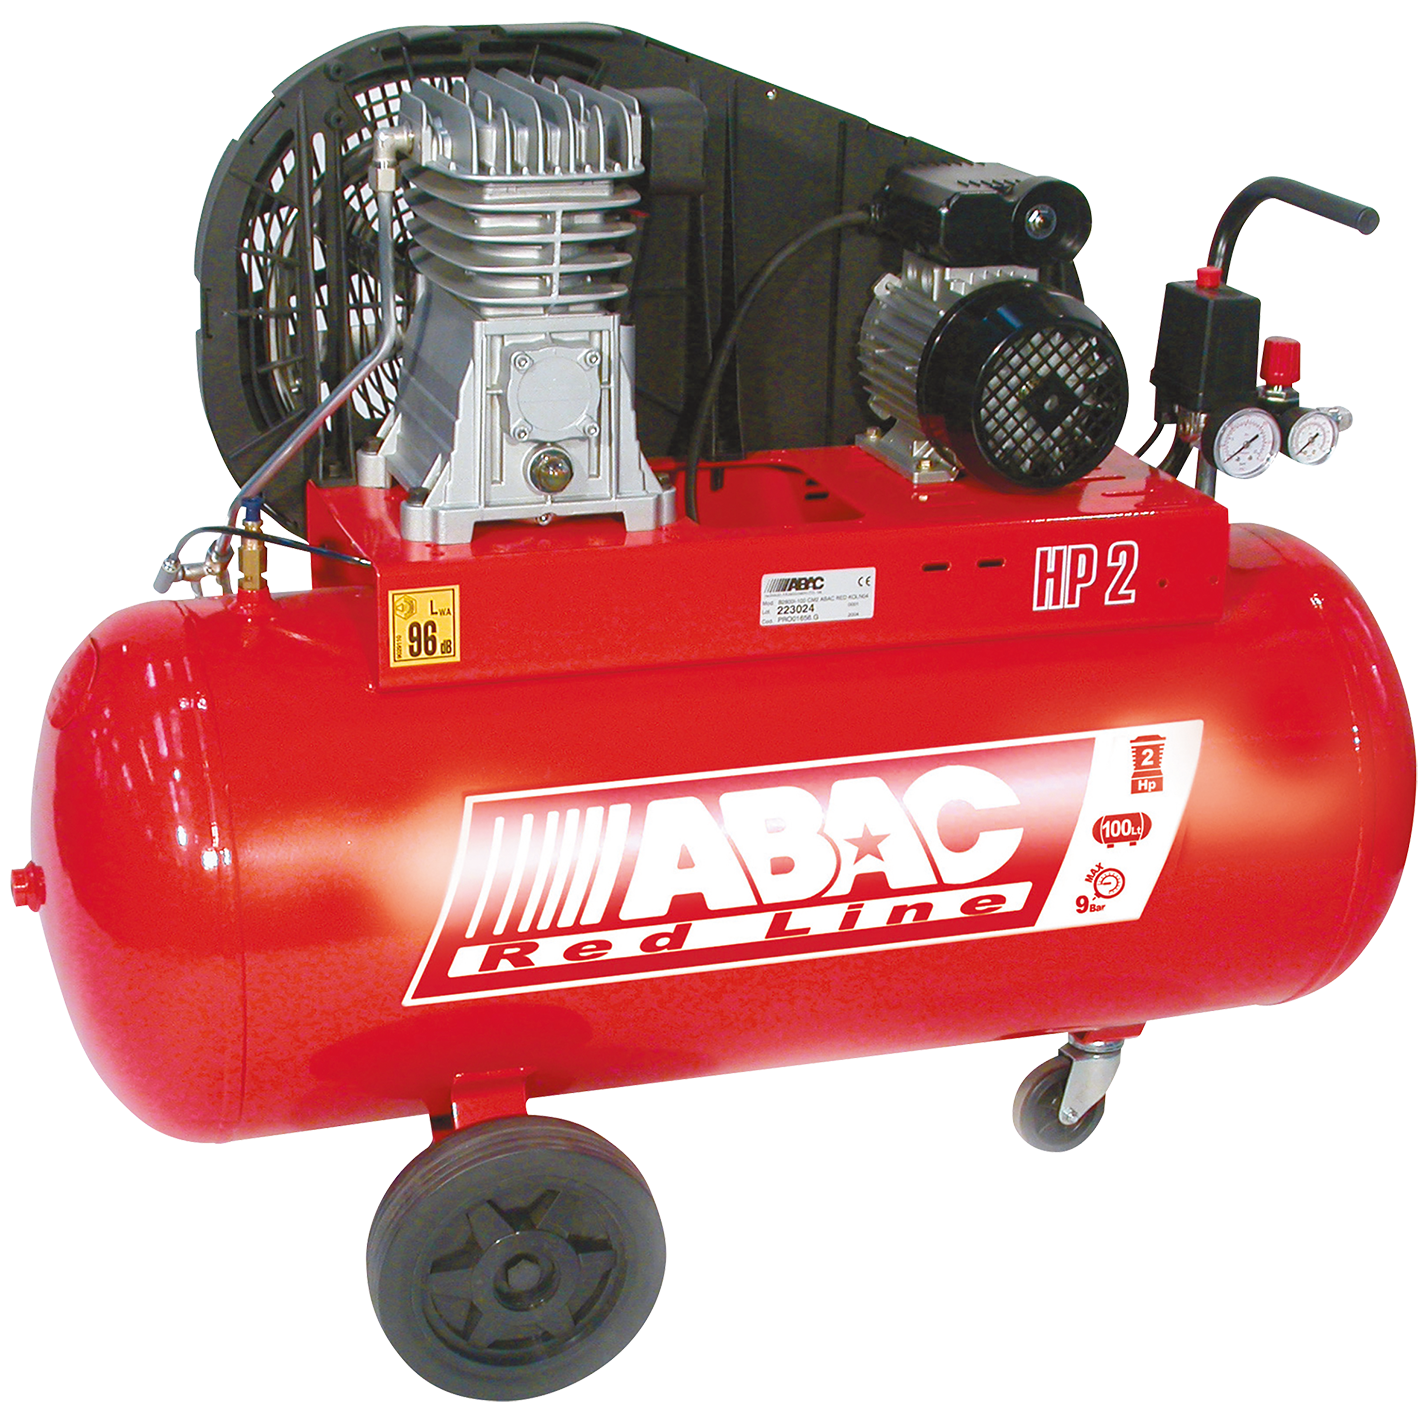 UK Suppliers of High Quality Portable Compressors